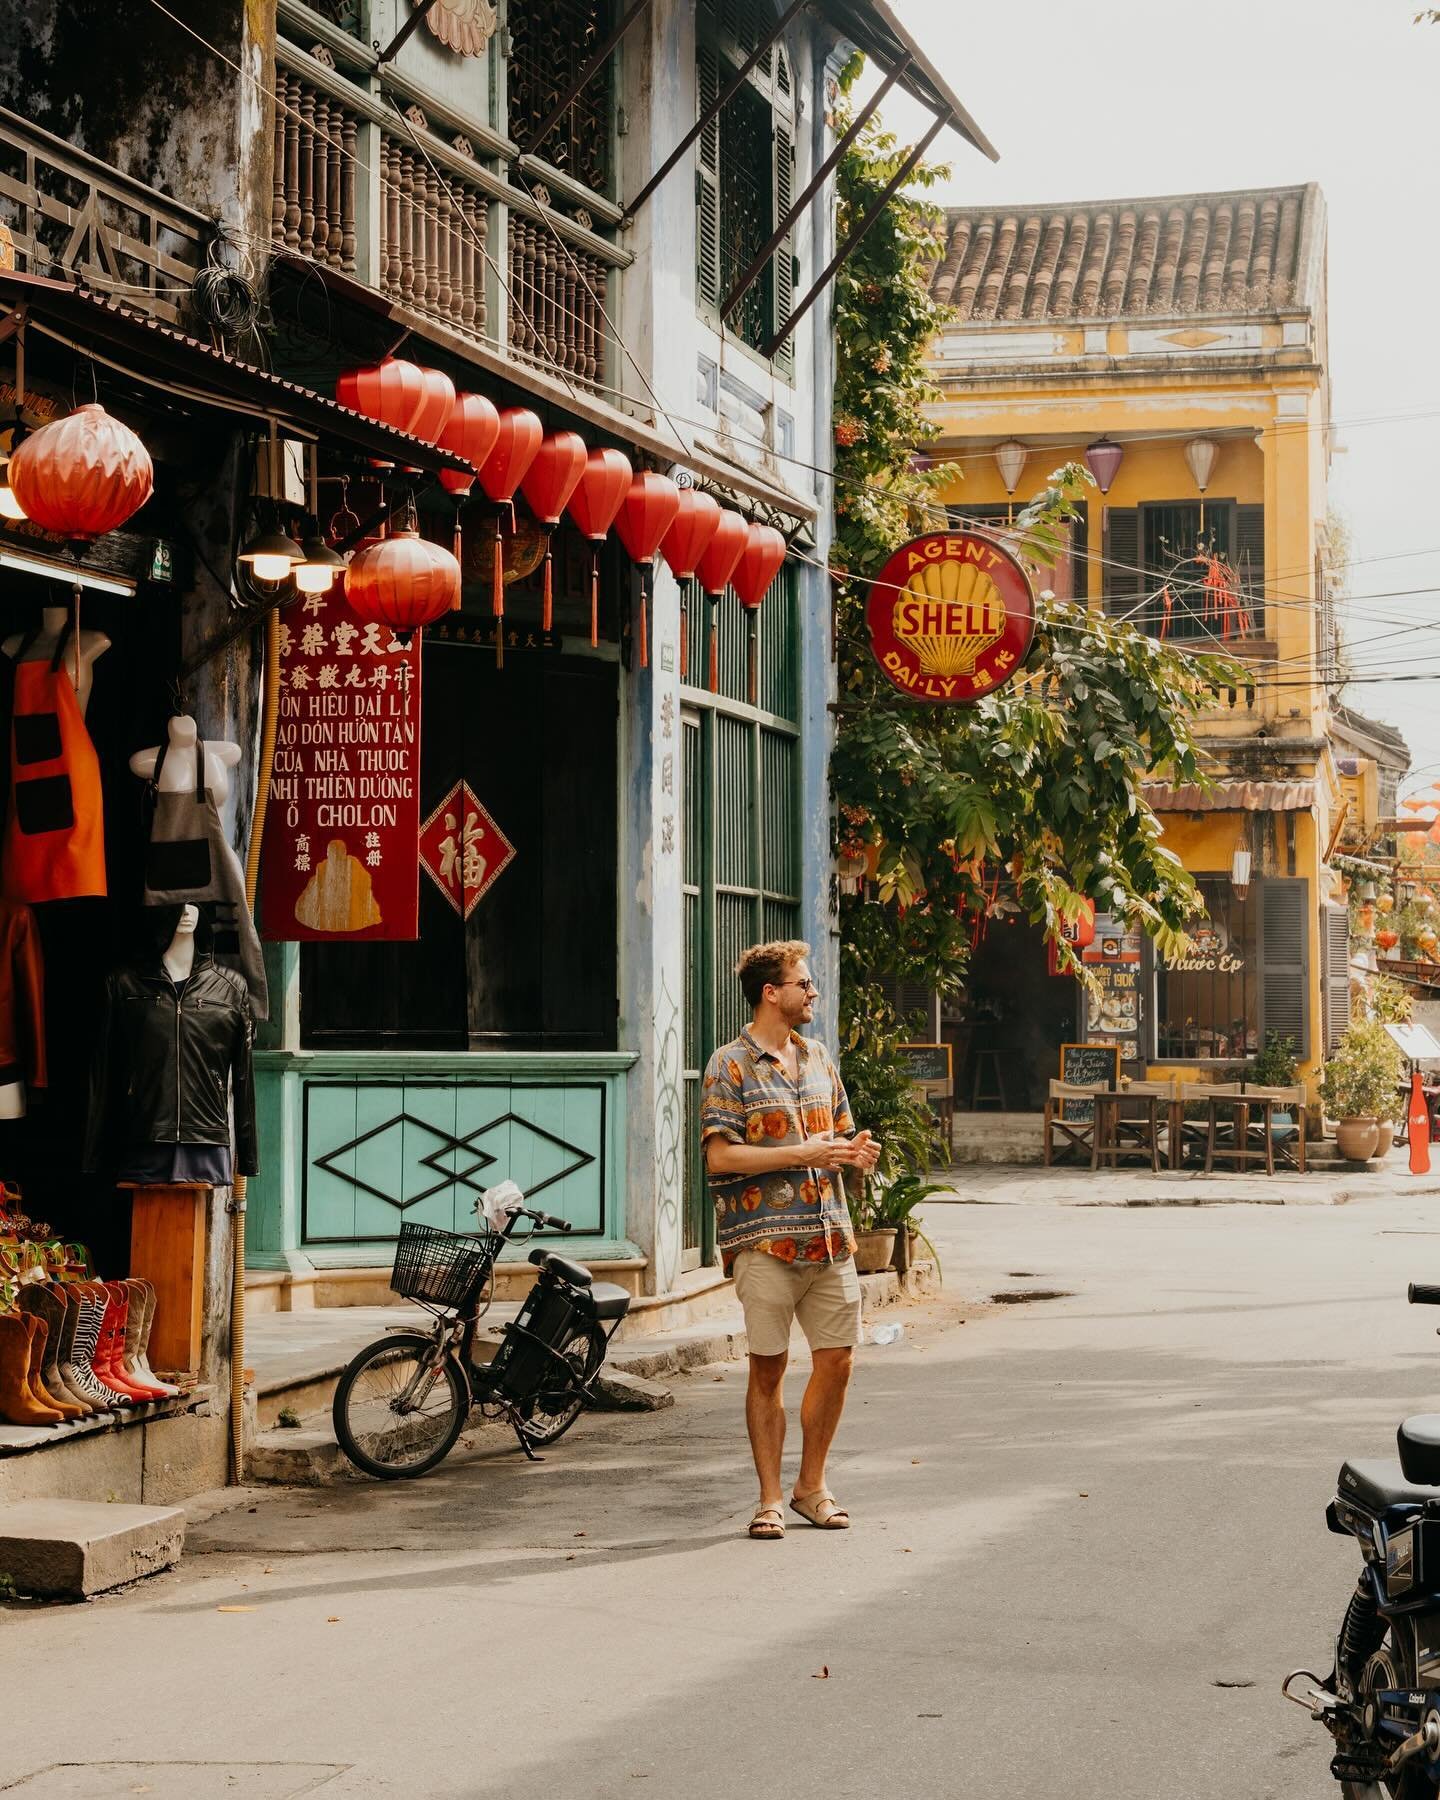 Dreamy Hoi An, where labyrinth streets are flanked by mustard-yellow merchant houses and brightly coloured temples, where colourful lanterns dance in the midday sun, and pink bougainvillea fall like waterfalls from balconies above.

Buuuuut by 10am, 